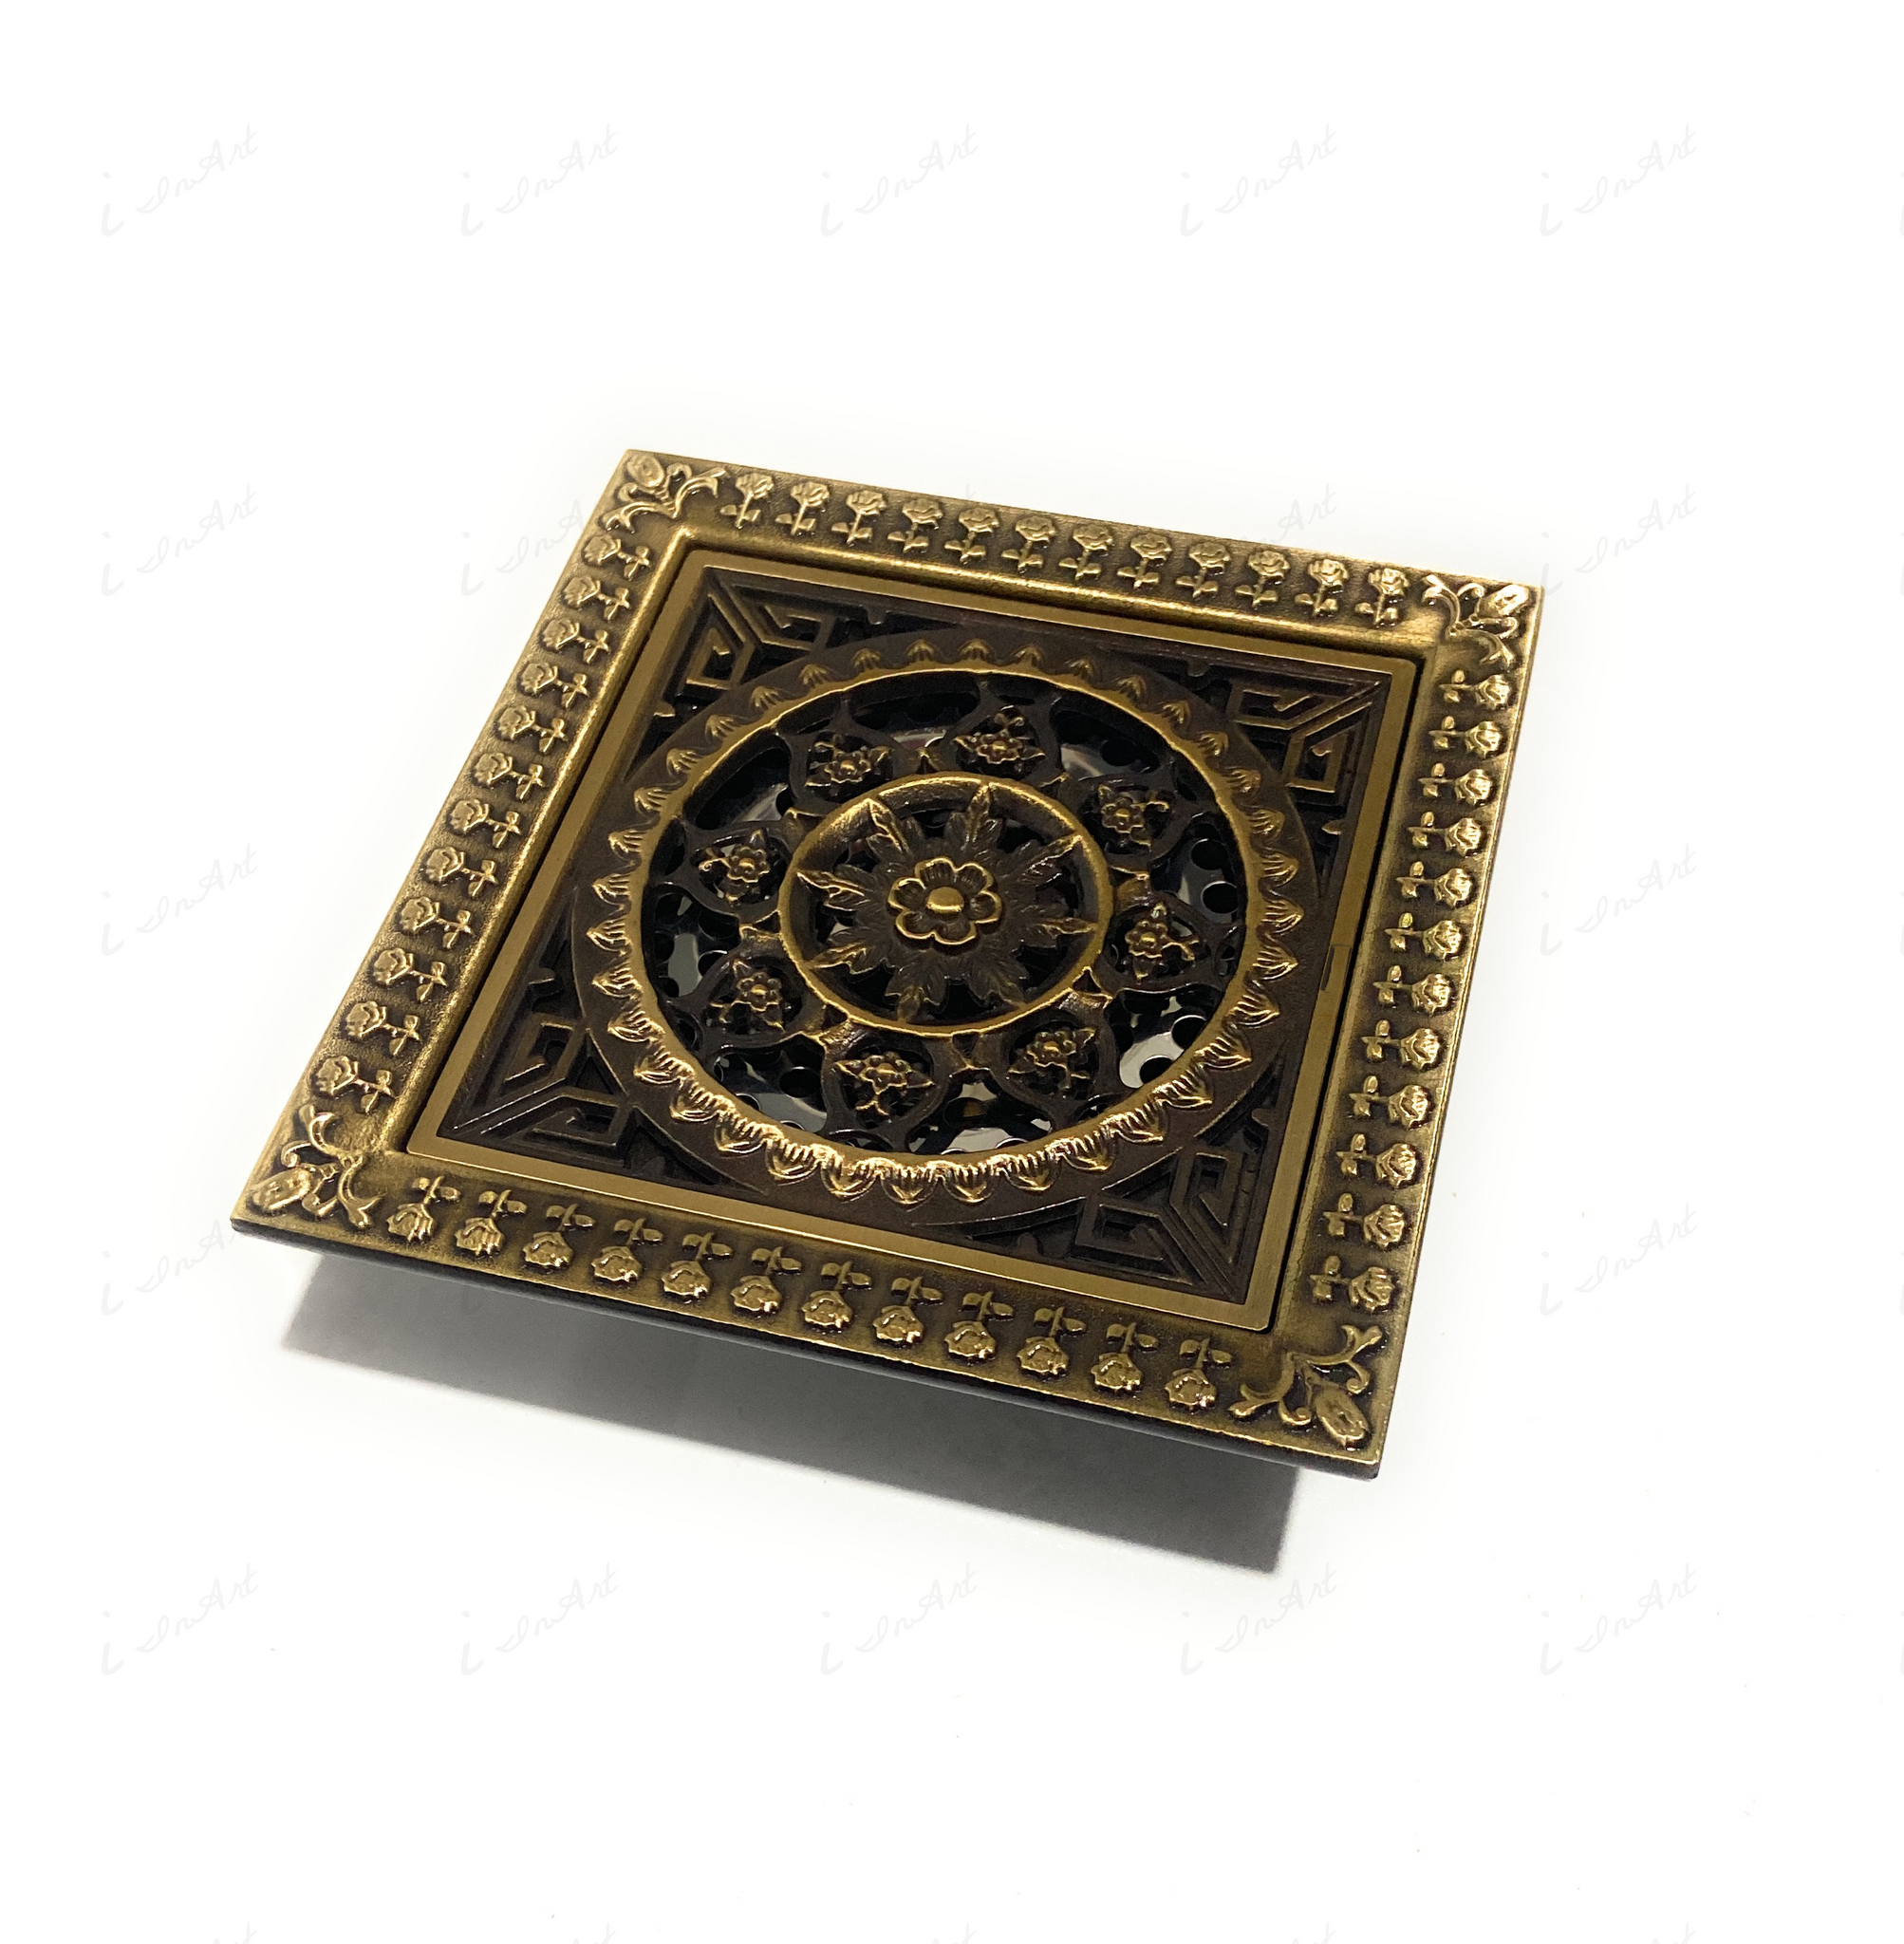 InArt Brass Square Shower Floor Drain with Removable Cover Grid Grate 5 inch Long Antique Finish Floral